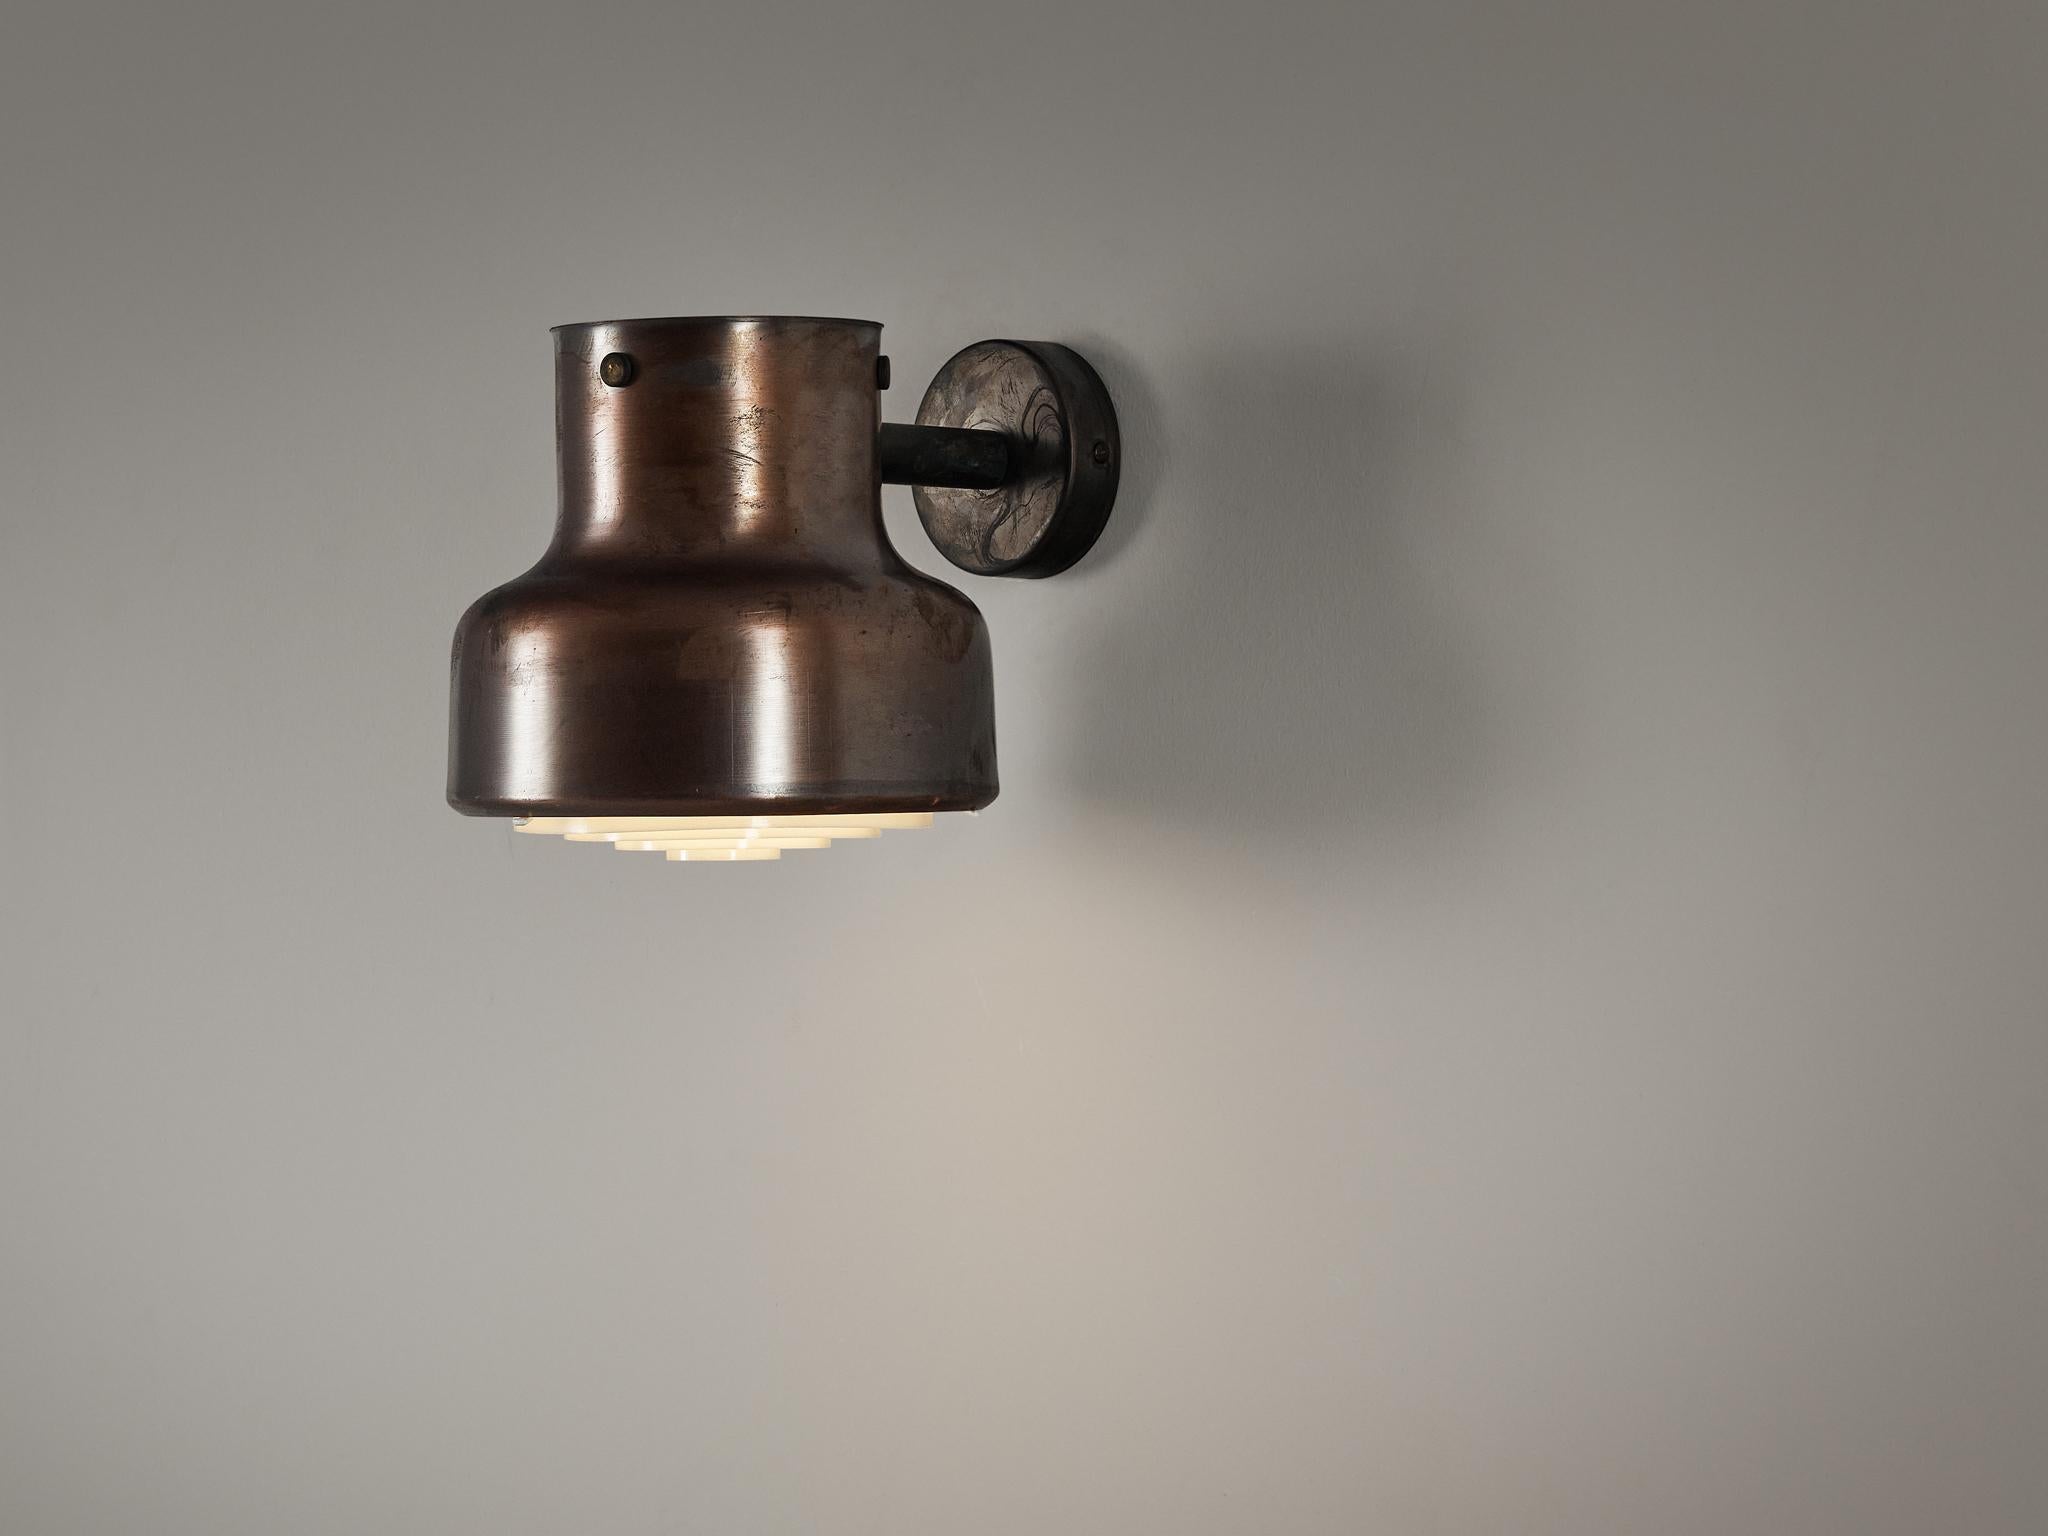 Anders Pehrson for Atelje Lyktan 'Bumling Utomhus' wall lights, copper, Sweden, 1968.

These 'Bumling' wall lamps are designed by Anders Pehrson for Ateljé Lyktan. The curved lampshade is secured to the wall by means of a round plate. Over time, the